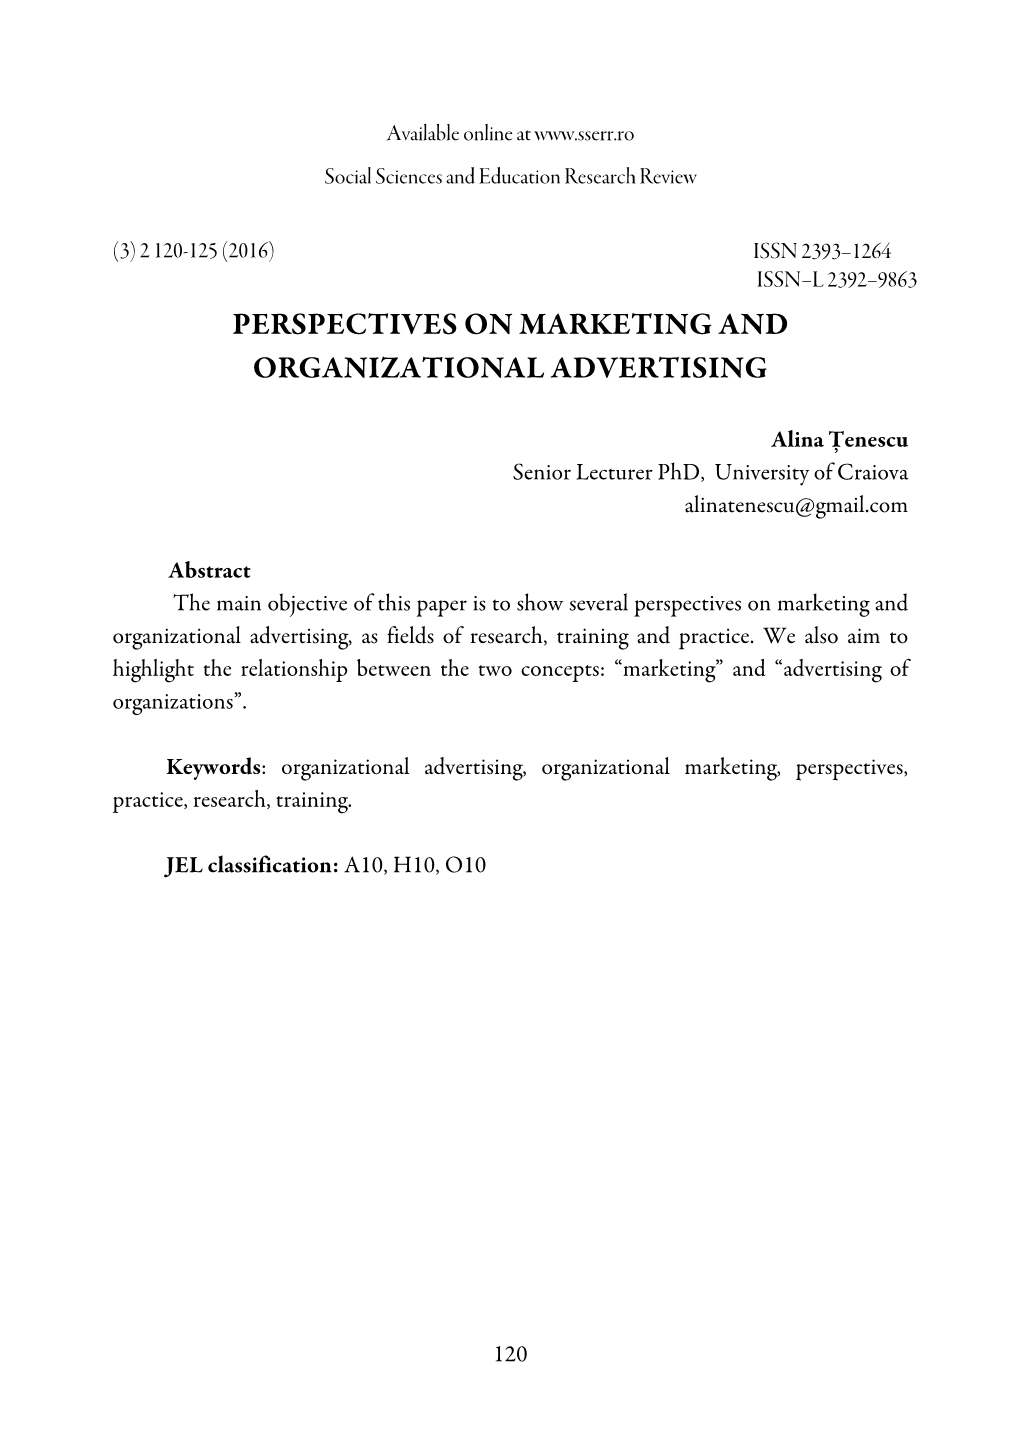 Perspectives on Marketing and Organizational Advertising